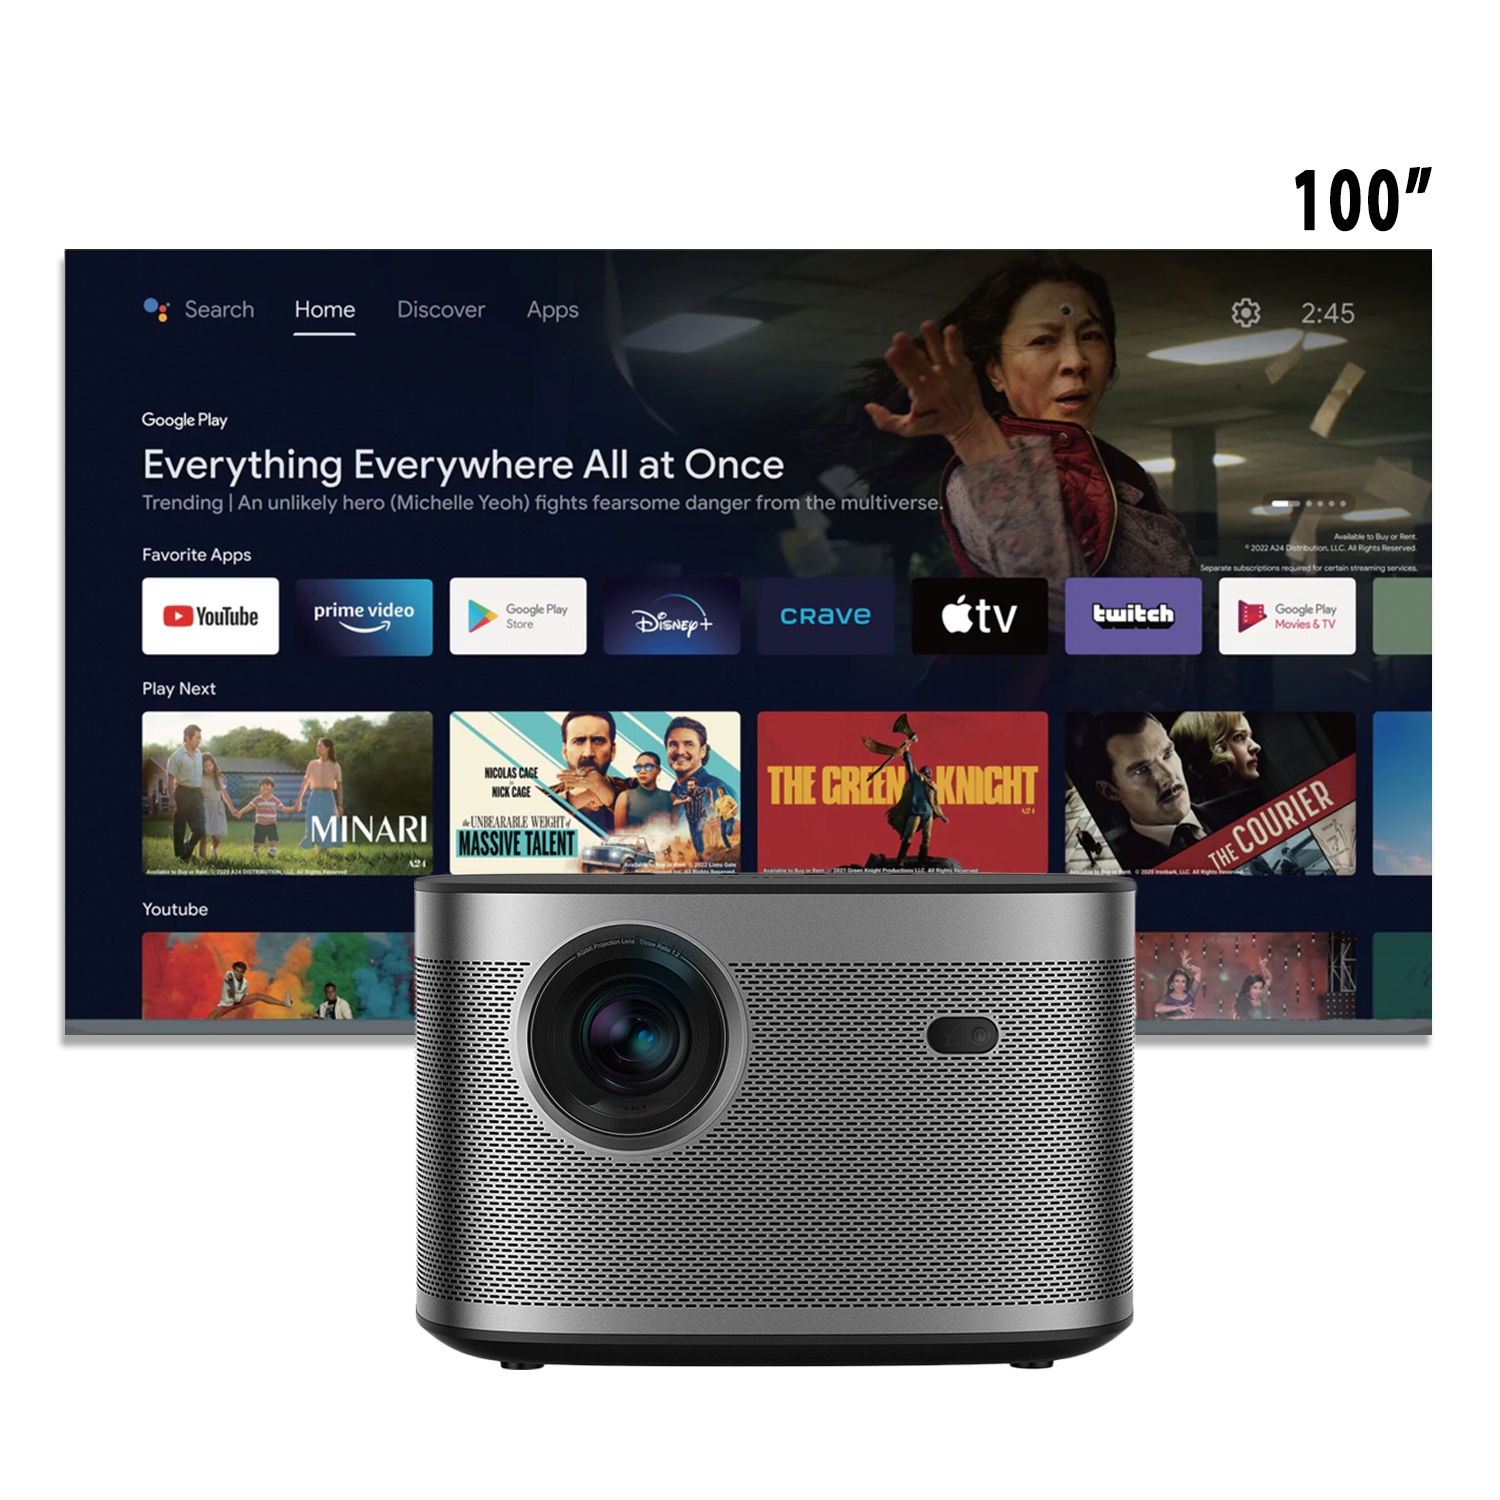 XGIMI Horizon 4K Projector + 100" Screen Bundle, Android TV, 2200 ANSI Lumens, 16W Harman Kardon Speakers, HDR10, Home Theater Image Quality